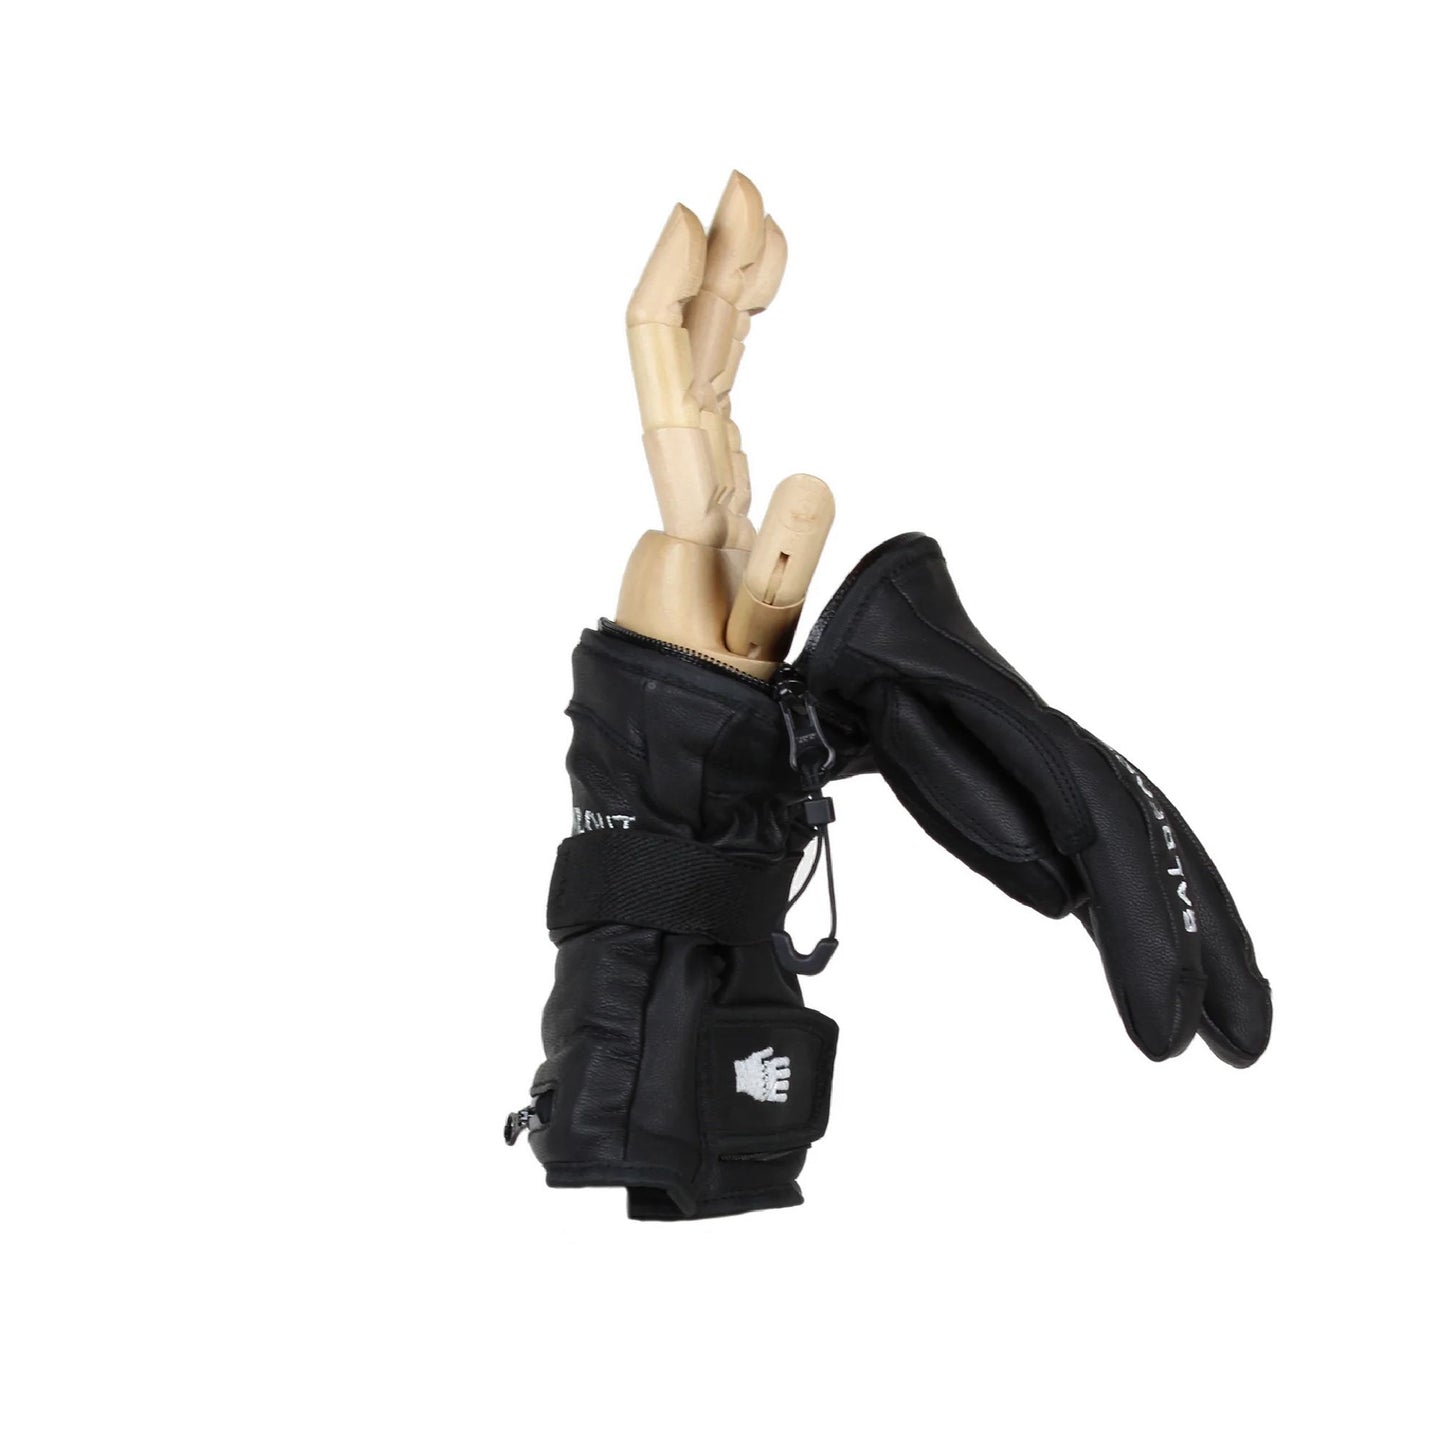 Hand Out Baldface Guide Gloves Black Snow Gloves